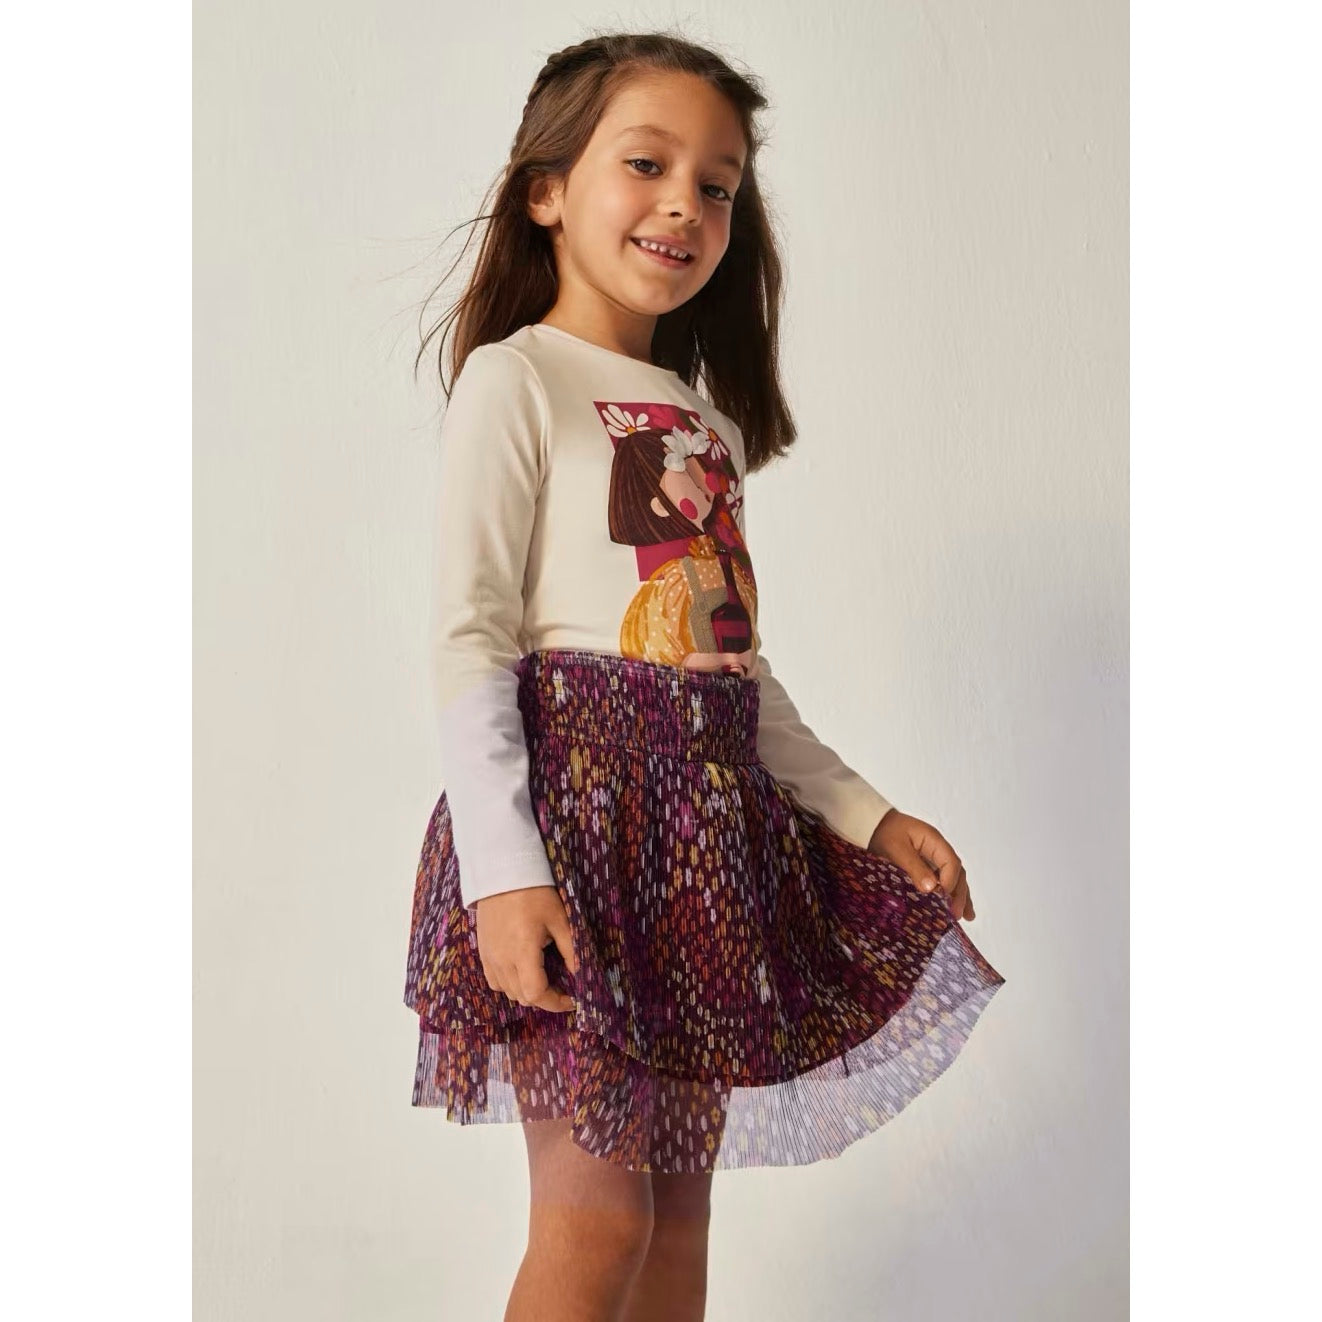 Mayoral Girls Printed Tulle Skirt 4904 Berry Clothing 4YRS / Berry,5YRS / Berry,6YRS / Berry,7YRS / Berry,8YRS / Berry,9YRS / Berry